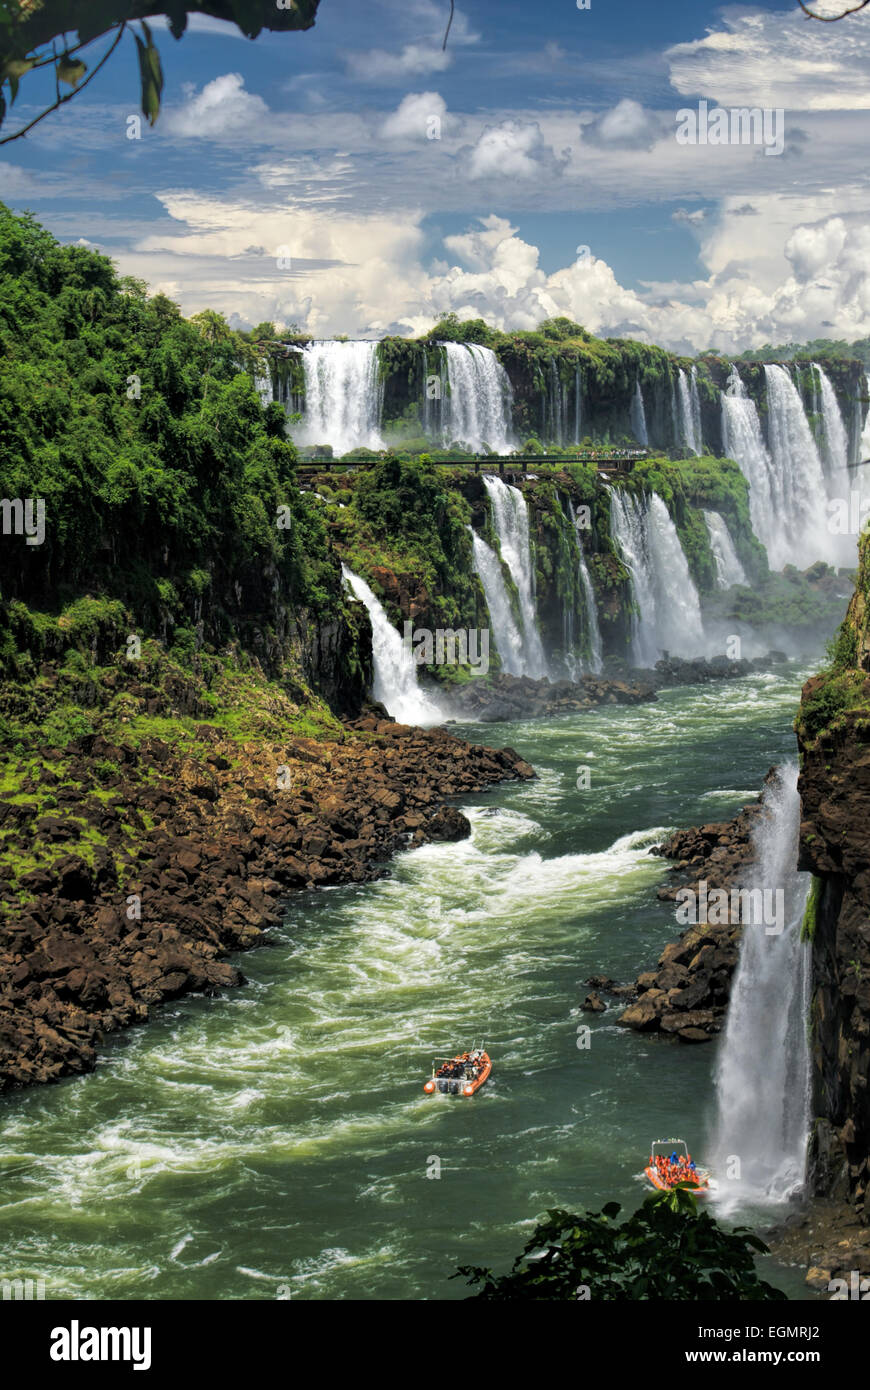 Dramatic view of Iguazu waterfalls in Argentina with tourist boats on the river Stock Photo